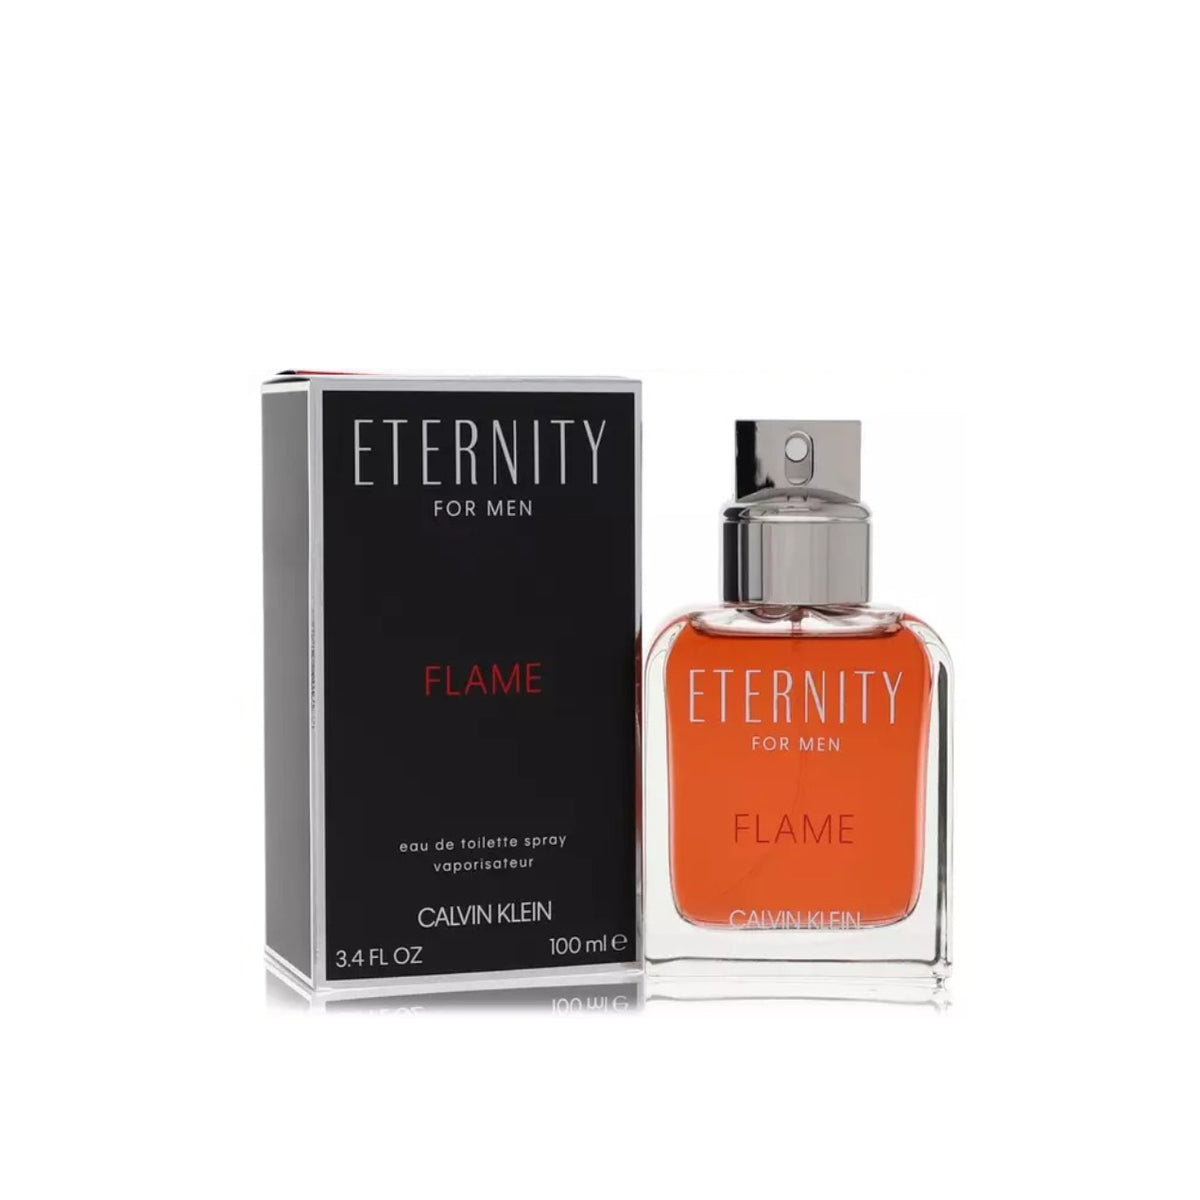 Eternity Flame Cologne Perfume for Men